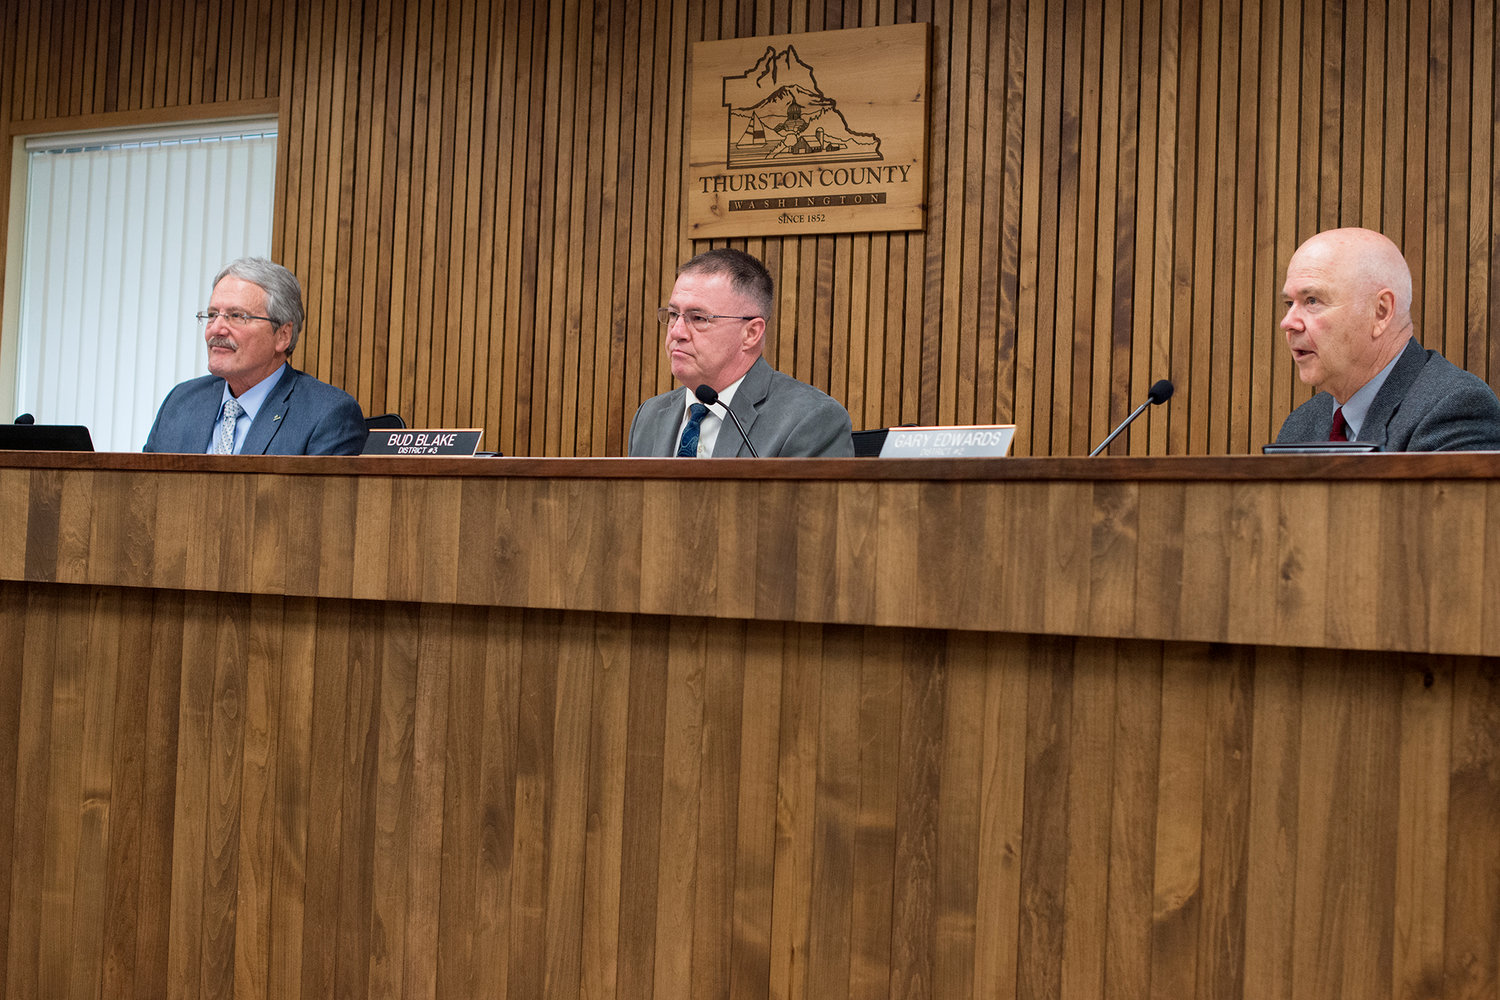 Thurston County Commissioners John Hutchings, Bud Blake and Gary Edwards listen to public comments during a meeting Tuesday, May 2, 2017, in Olympia.